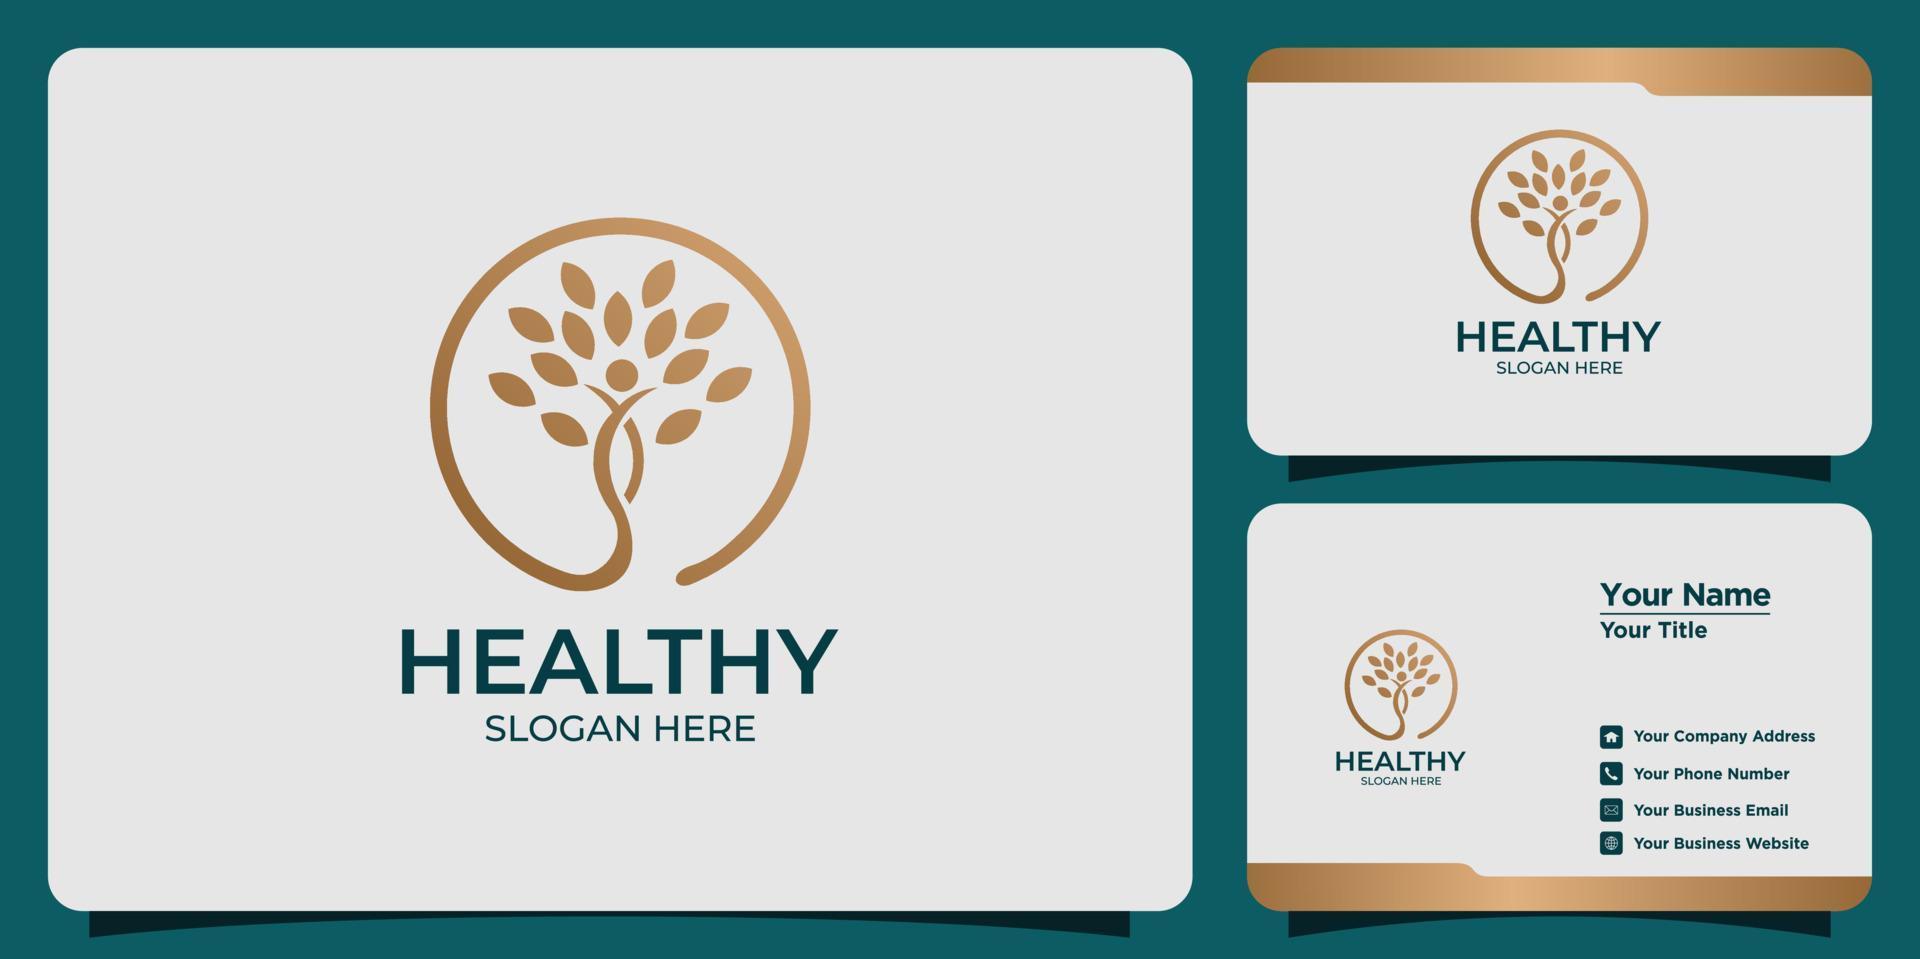 Minimalist health logo with modern style logo design and business card template vector